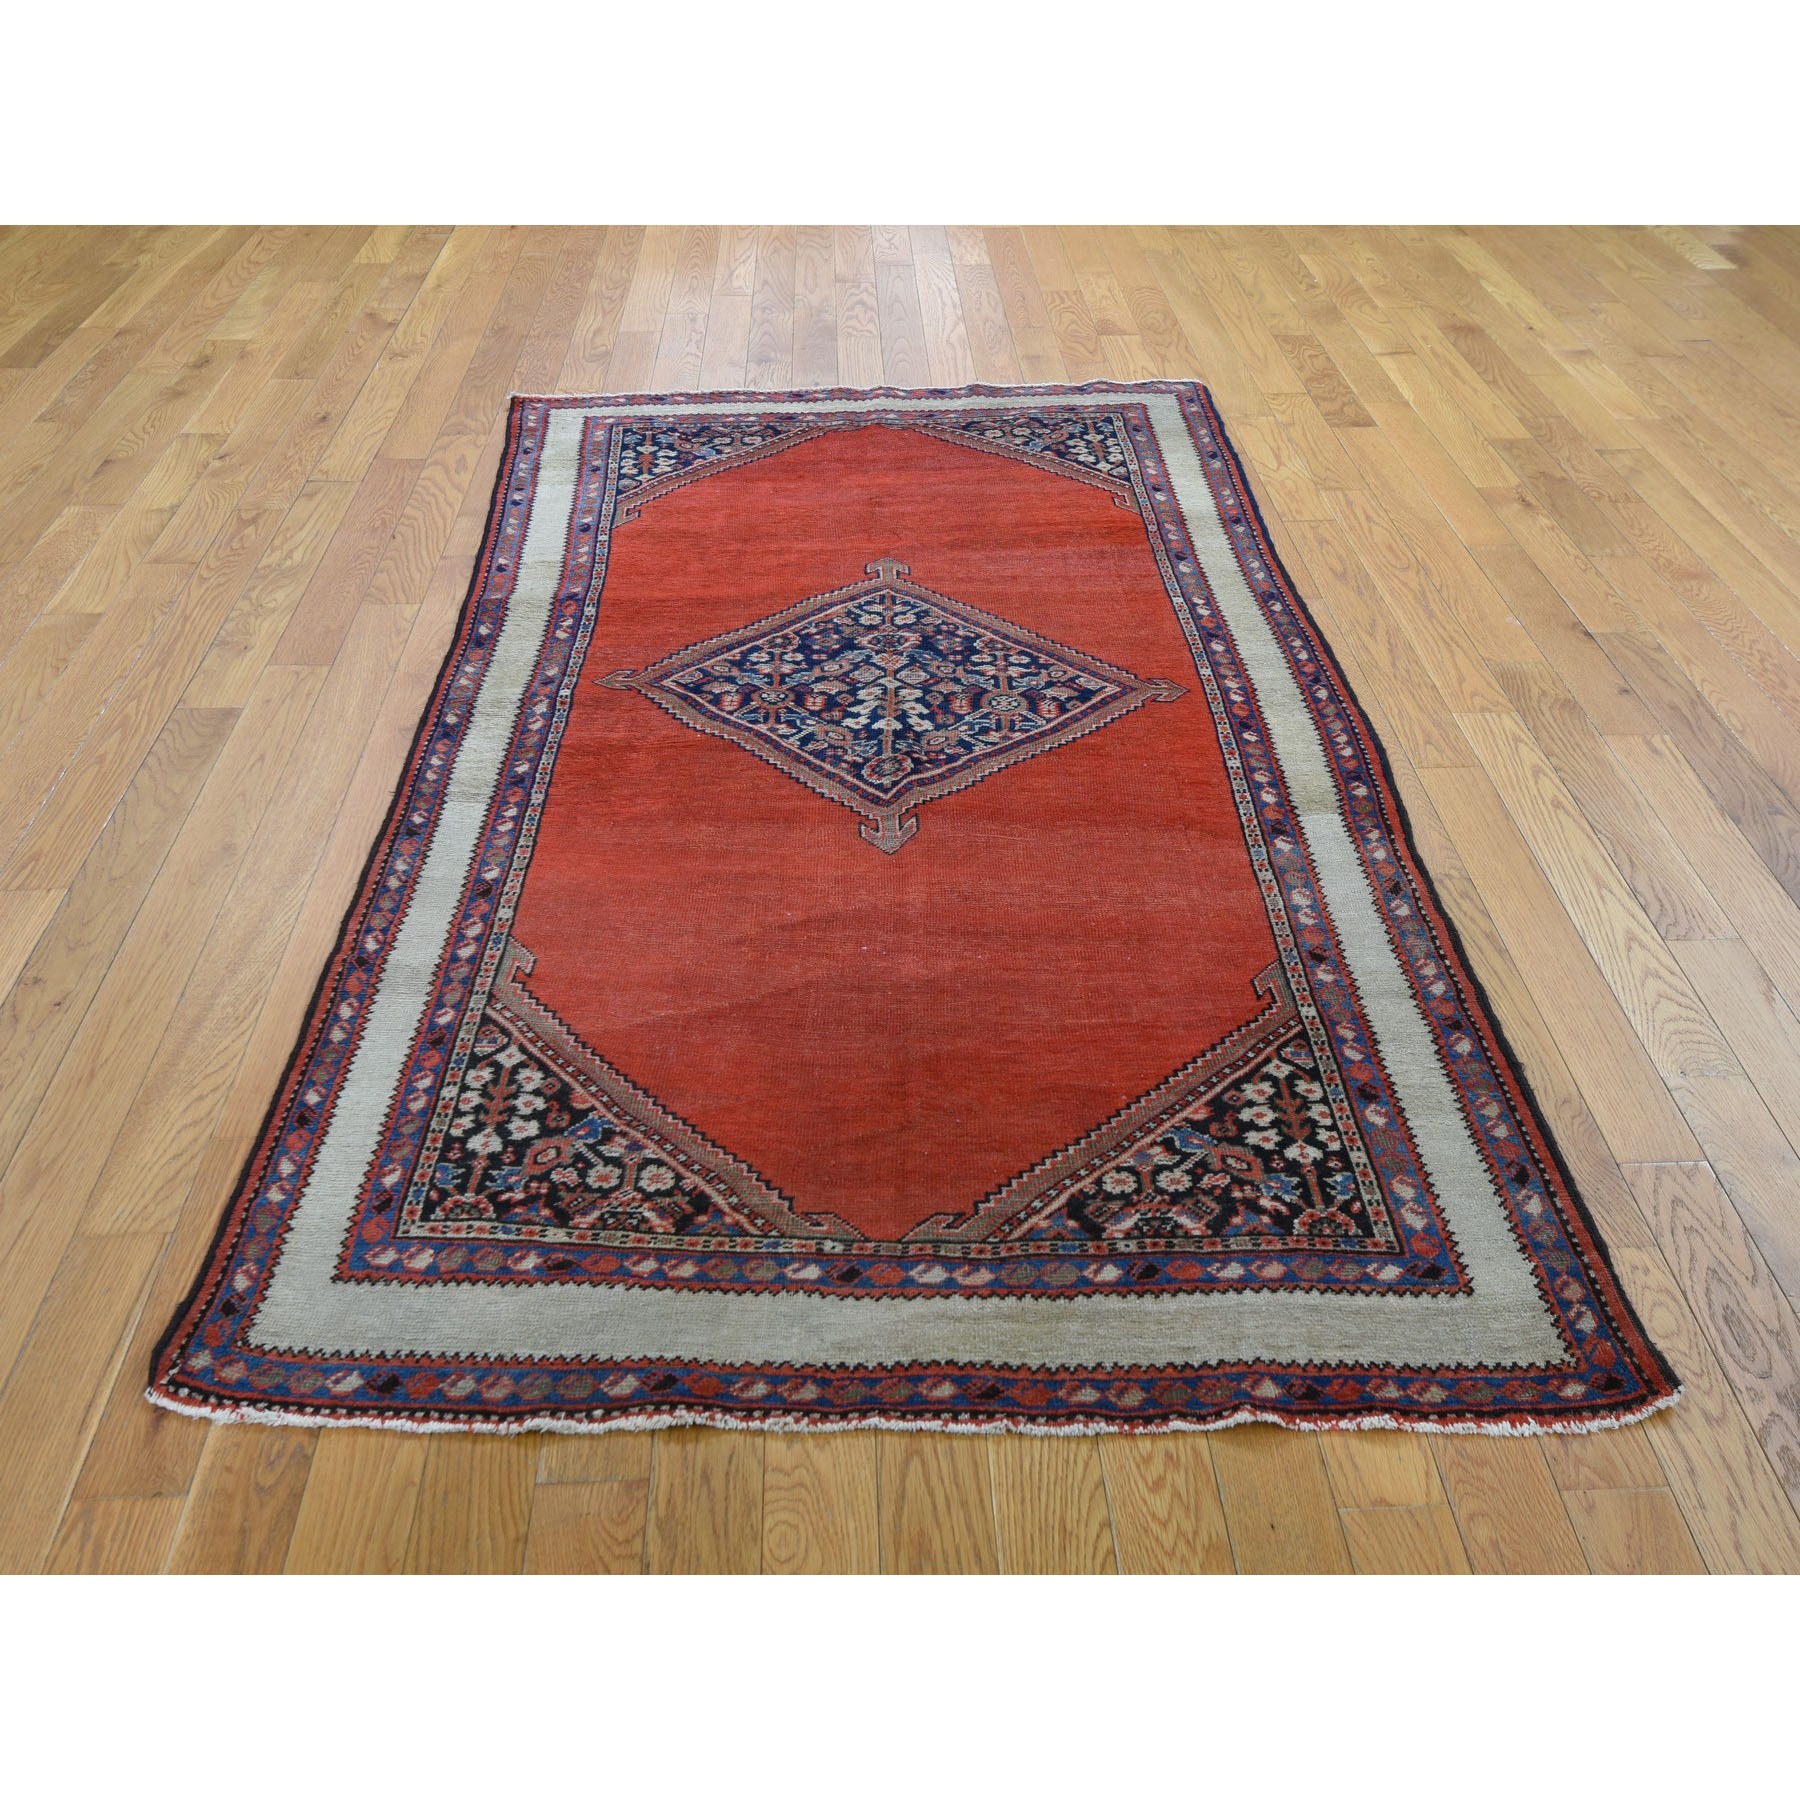 3-10 x6-8  Antique Persian Mahal Open Field Good Condition Even Wear Hand Knotted Oriental Rug 